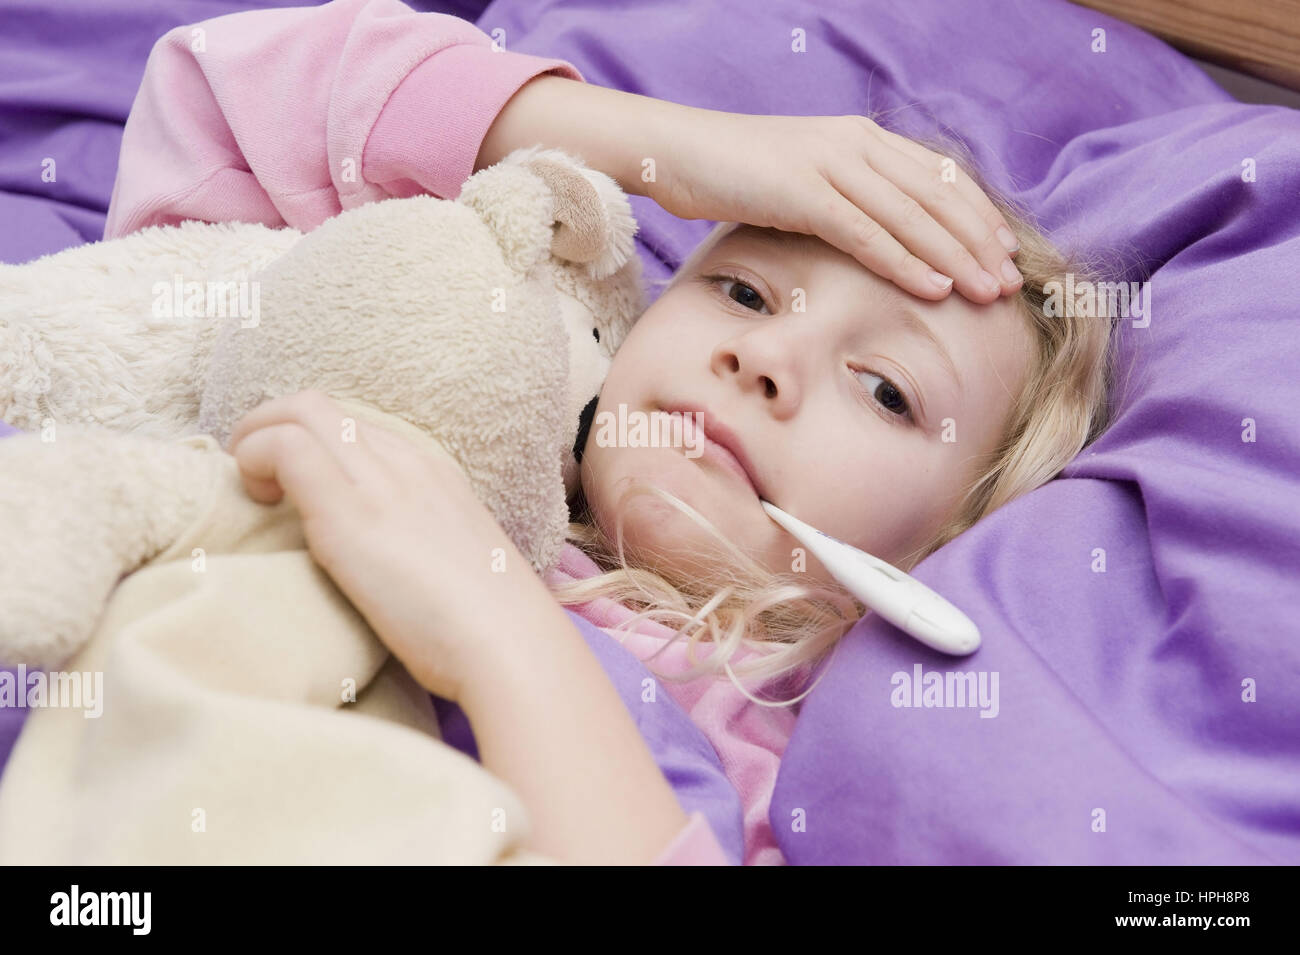 Krankes Maedchen liegt mit Fieberthermometer im Bett - sick girl with clinical thermometer in bed, Model released Stock Photo